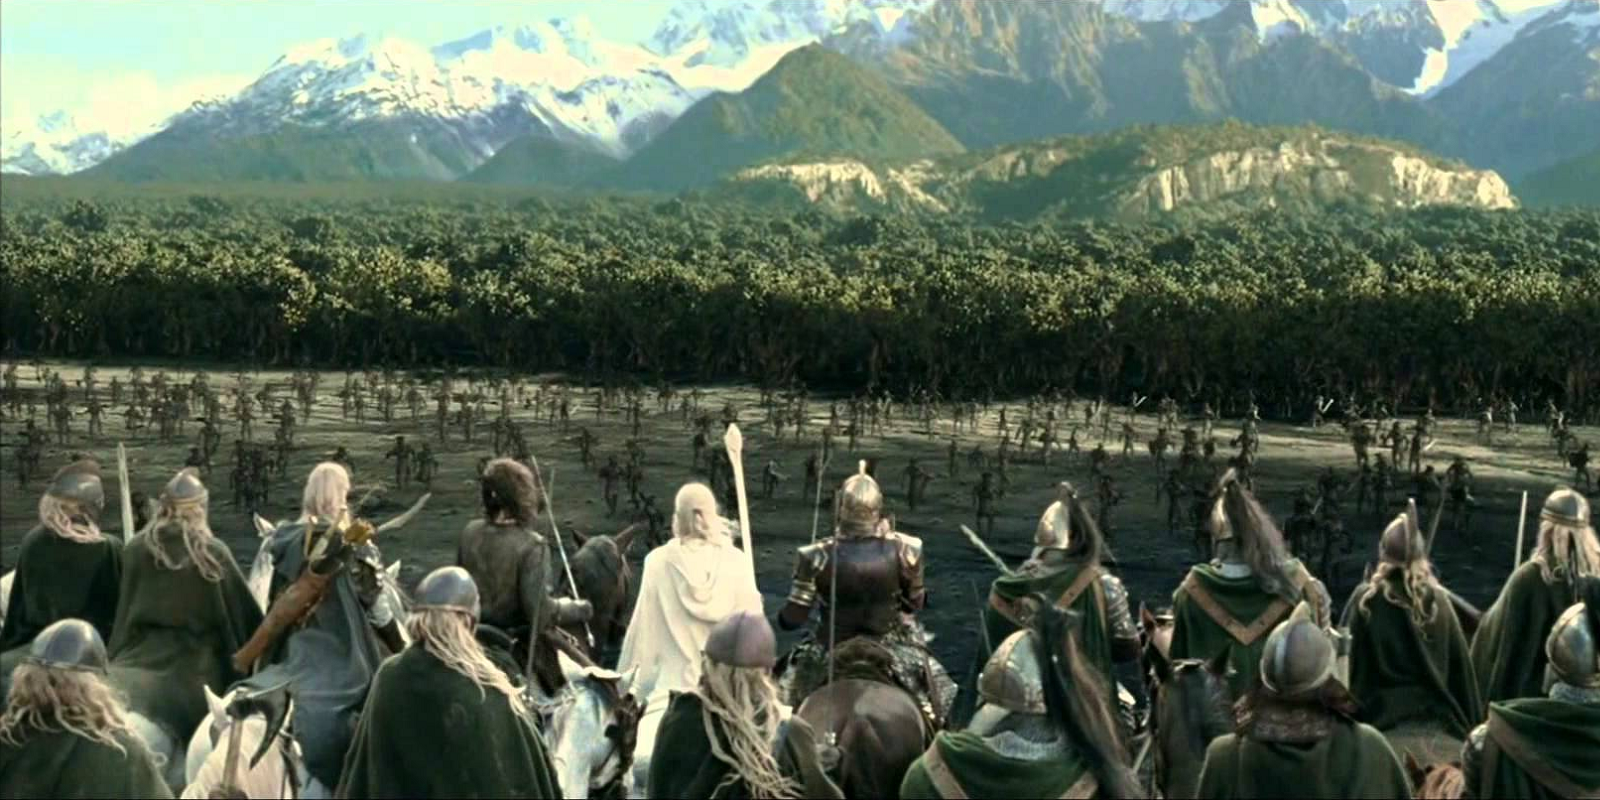 Ents in Lord of the Rings